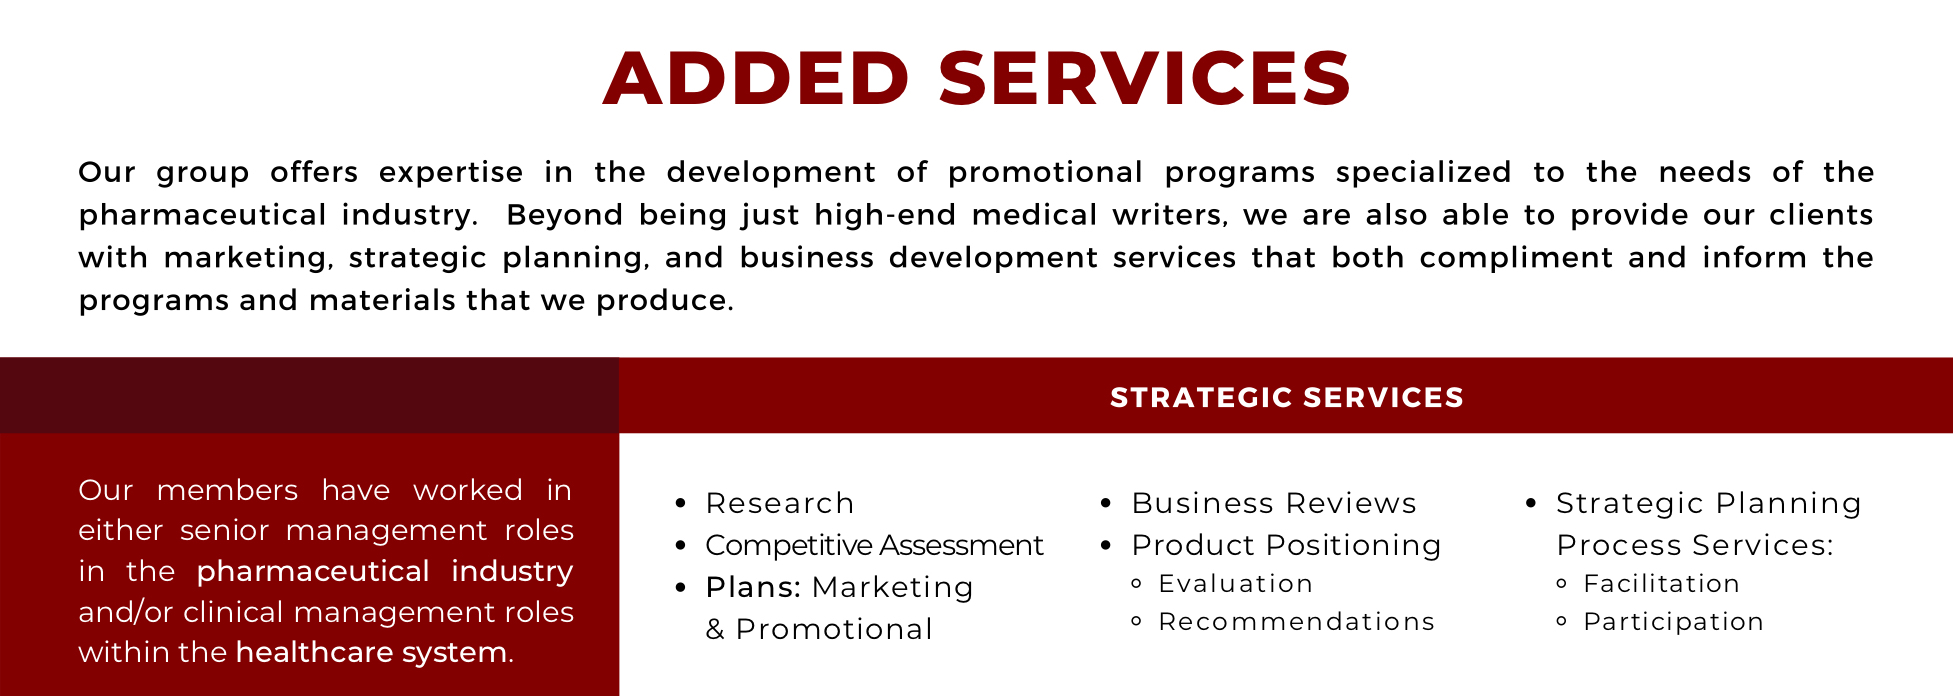 Added Services. Strategic Services. Research, competitive assessment, plans: marketing & promotional, business reviews, product positioning - evaluation & recommendations, strategic planning process services: - facilitation & participation